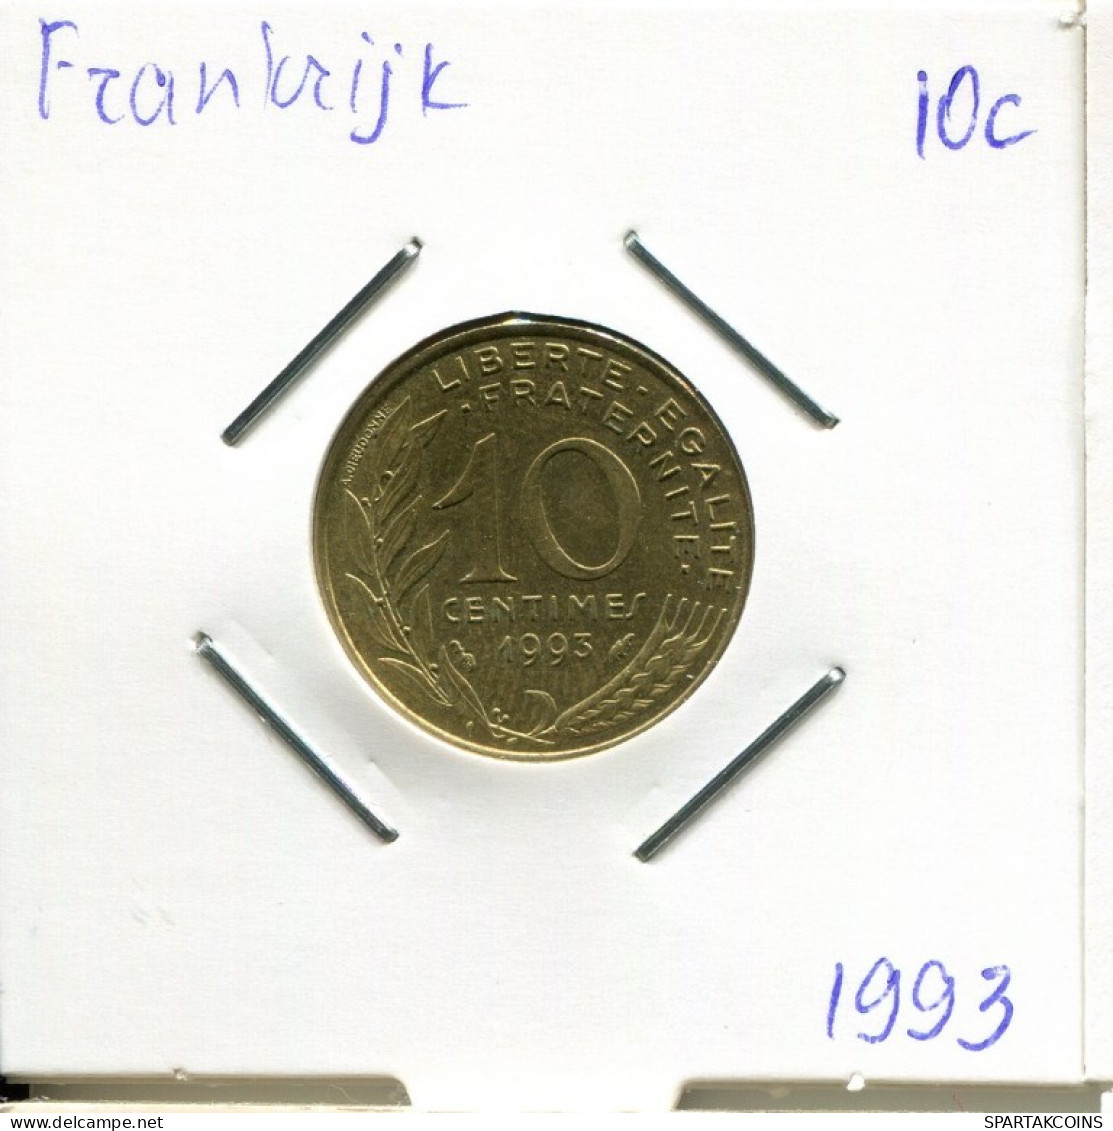 10 CENTIMES 1993 FRANCE Coin French Coin #AM834.U.A - 10 Centimes